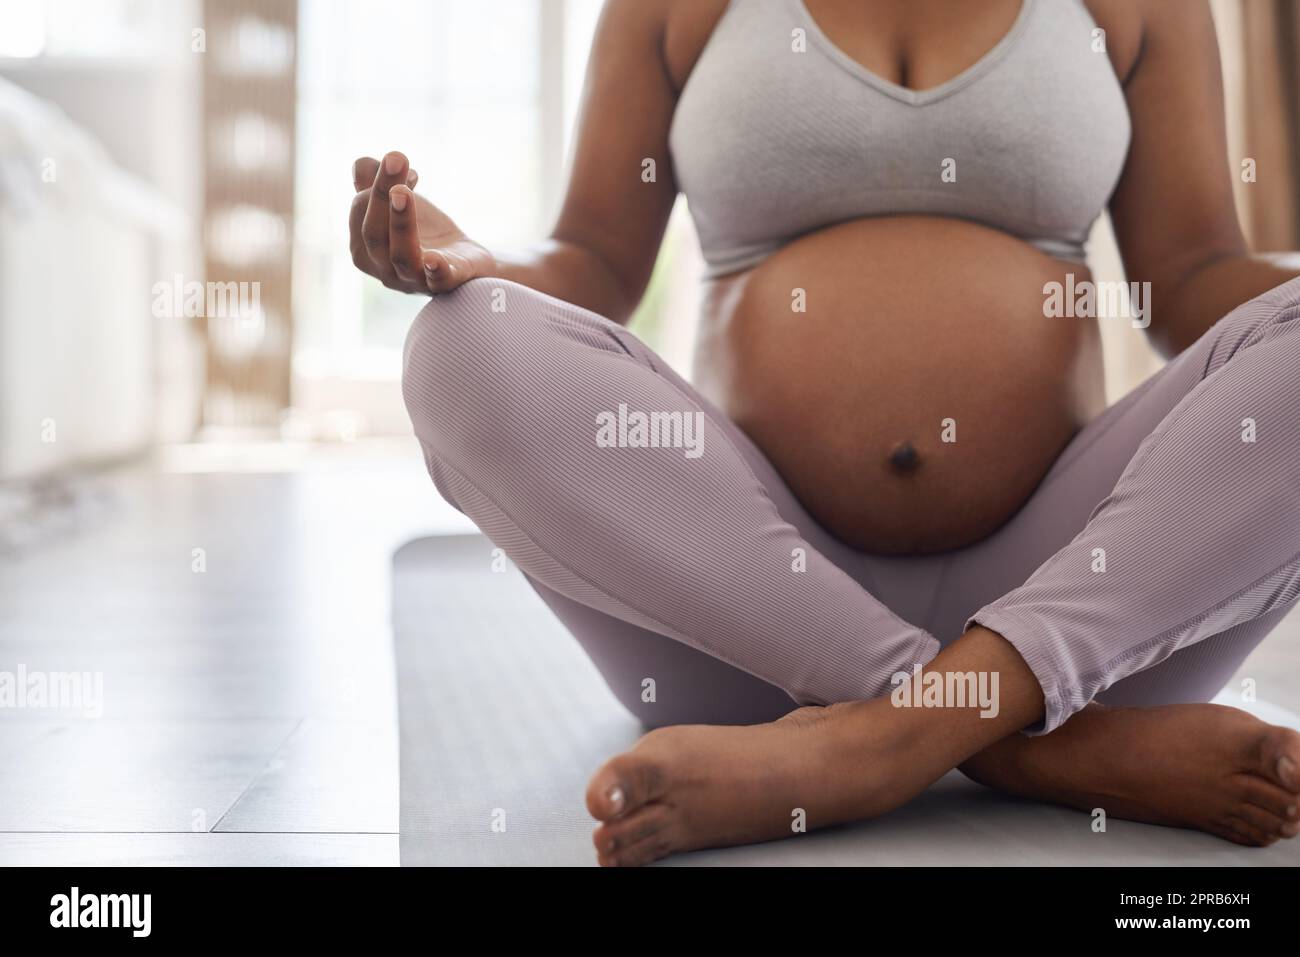 Strengthen your bond with yoga. a pregnant woman doing yoga at home. Stock Photo